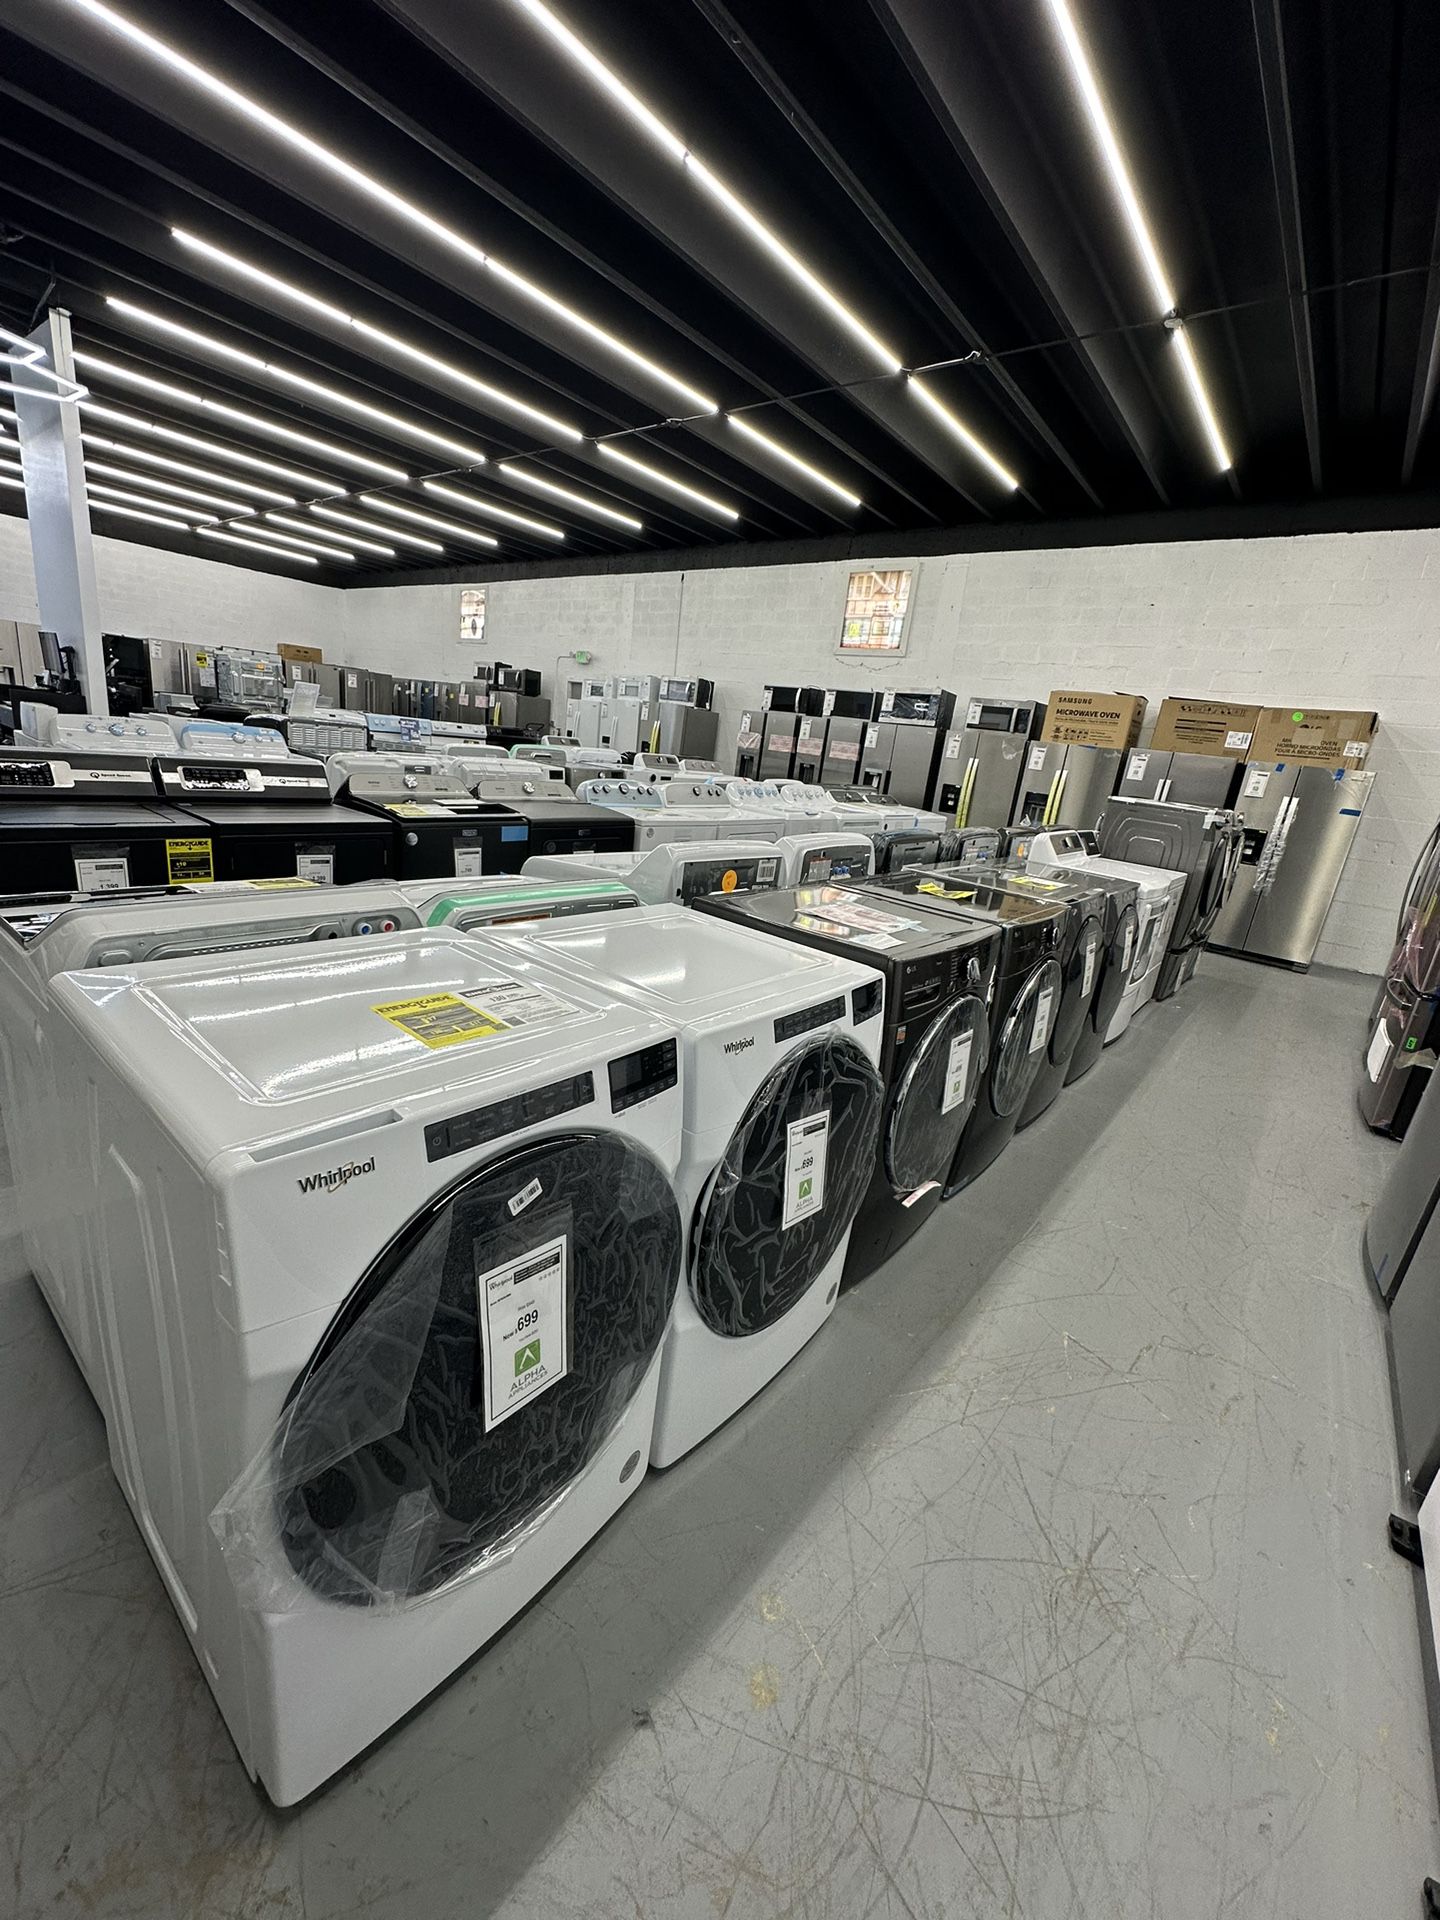 Appliances, New, New with scratch or dent, Refrigerator, Stove, Microwyave, Dishwasher, Washer, Dryer, Range.  No Credit Needed $39 down payment. Appl